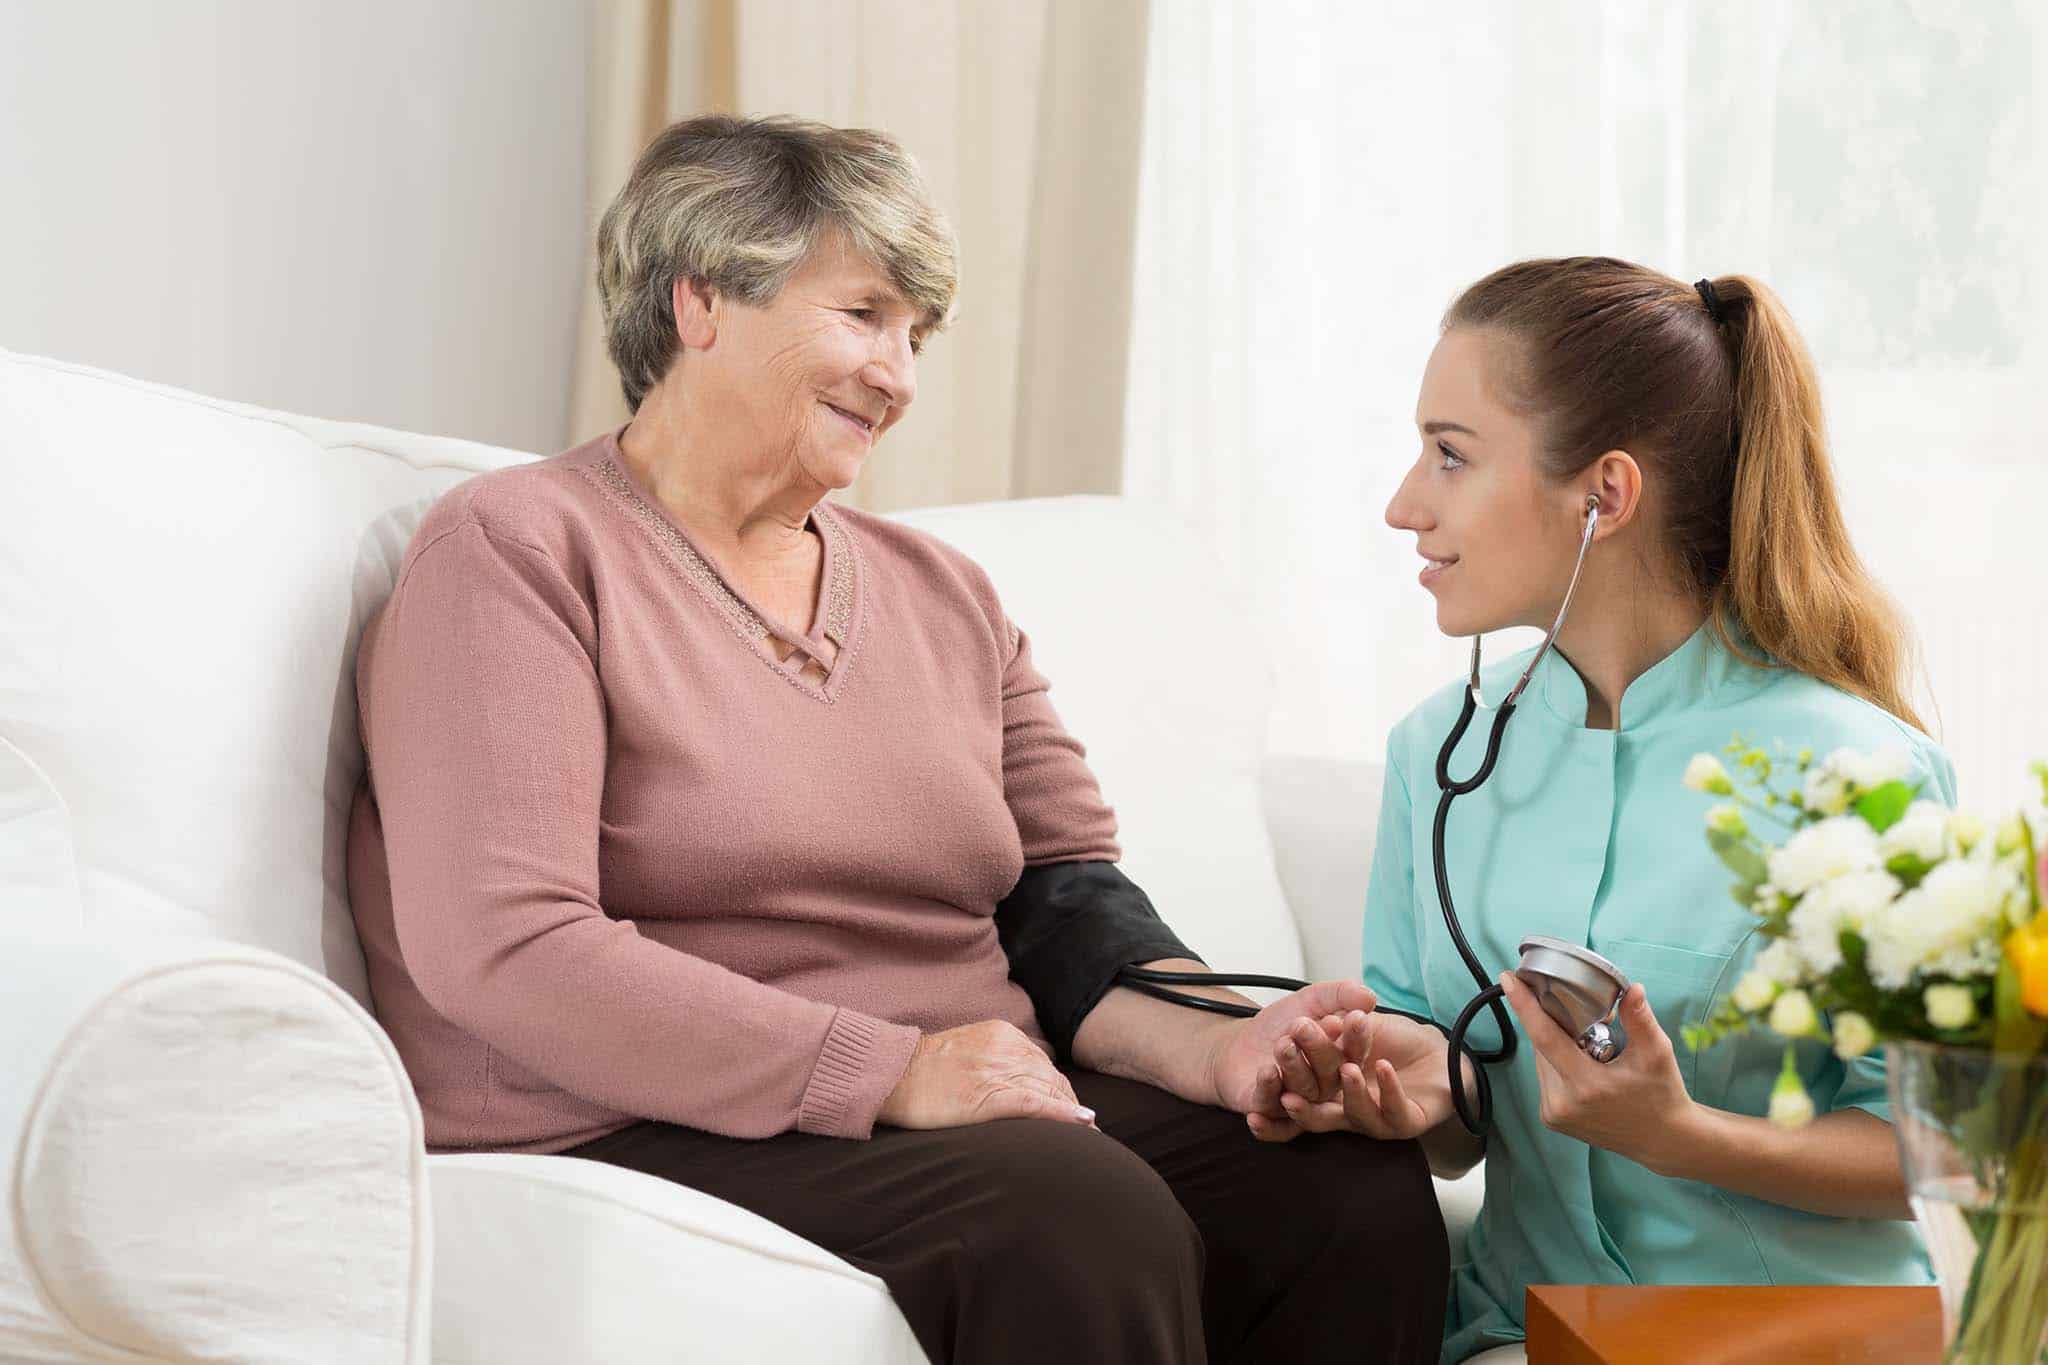 Long Term Care Staffing Agency for Nurses and Executives Resources for Employers